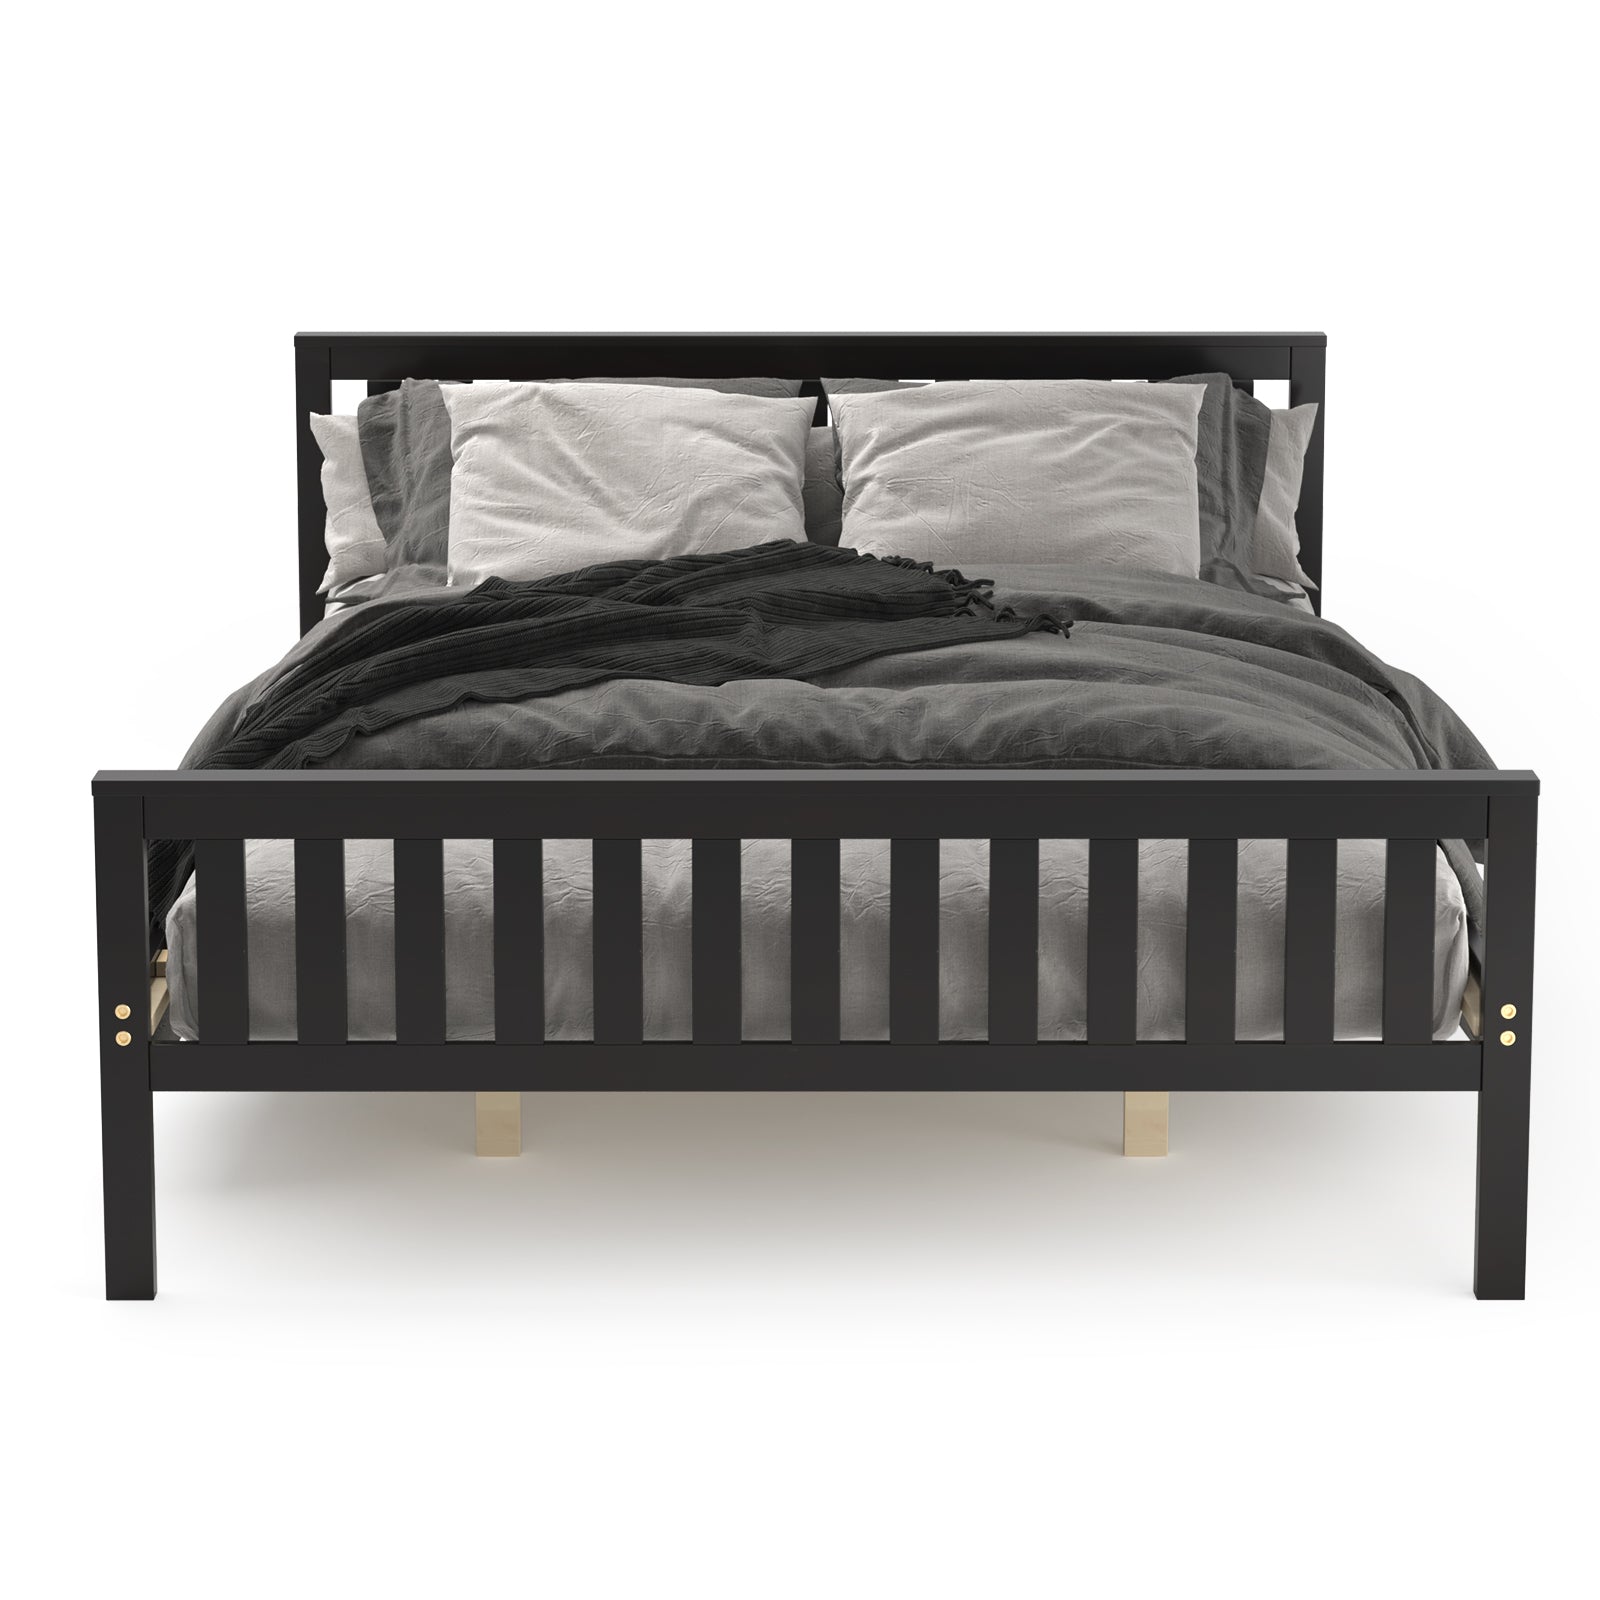 Queen Bed Frame with Valuable Under-bed Storage Space